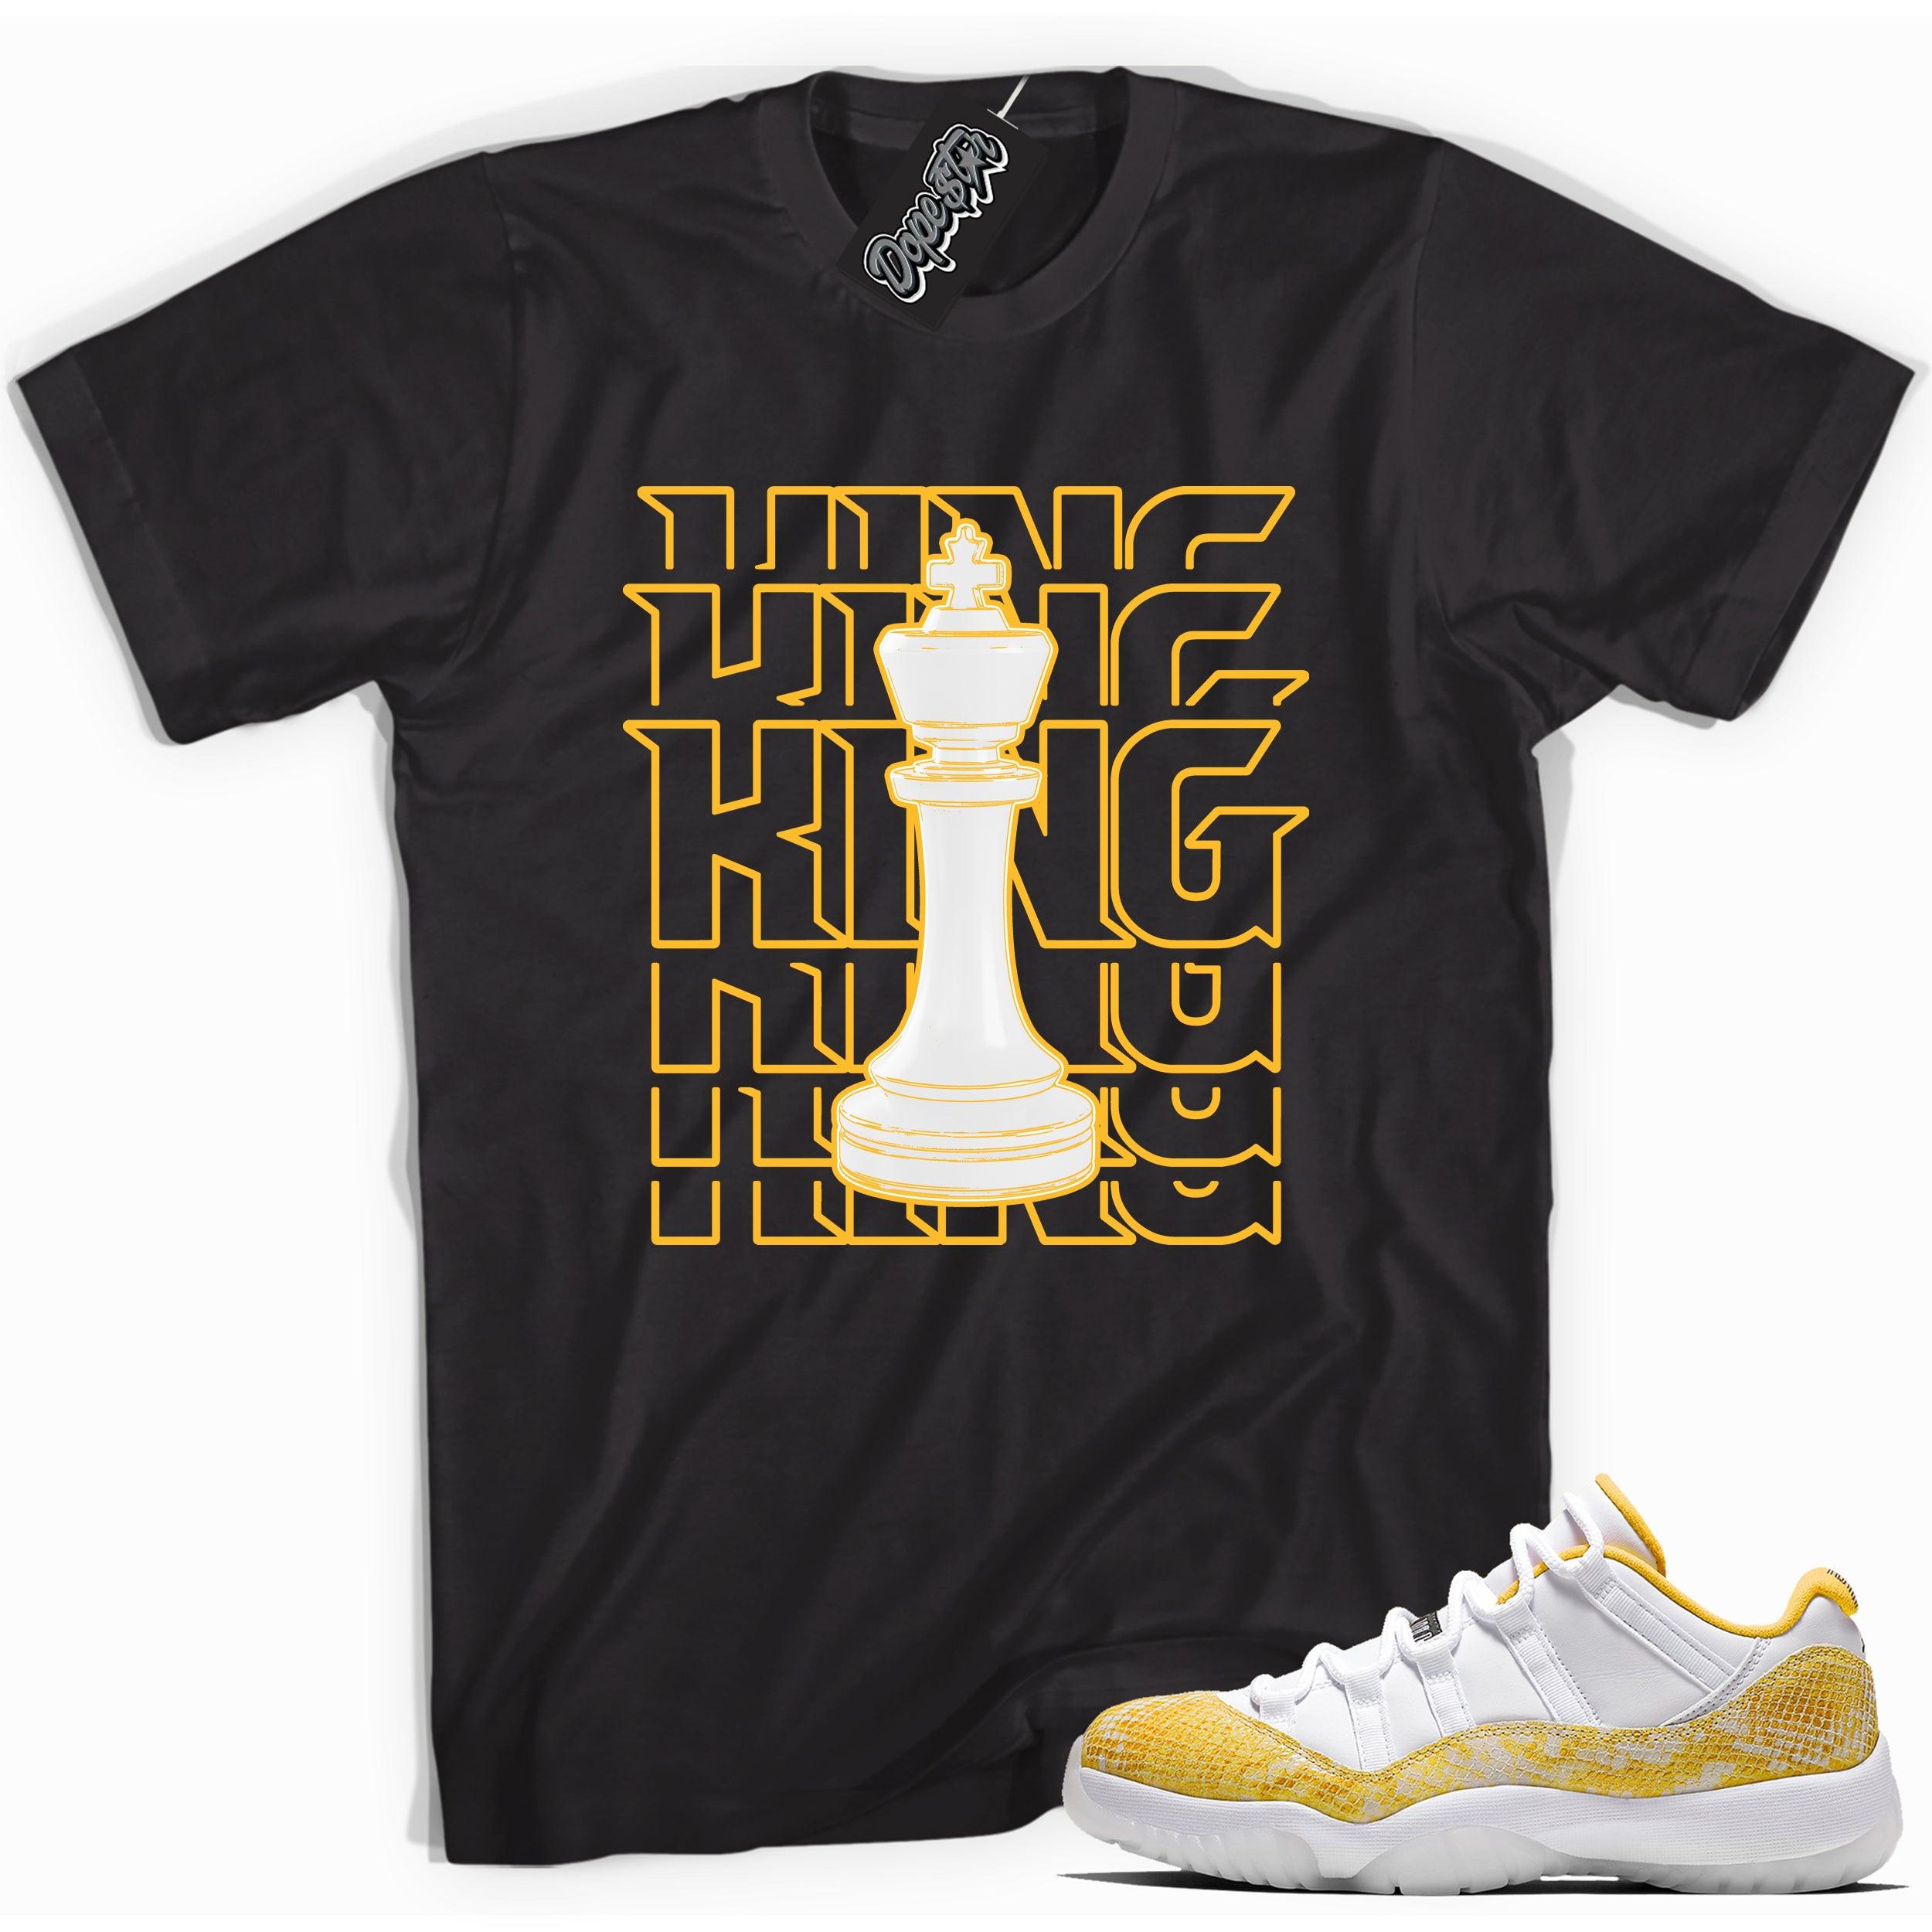 Cool black graphic tee with 'King' print, that perfectly matches  Air Jordan 11 Low Yellow Snakeskin sneakers